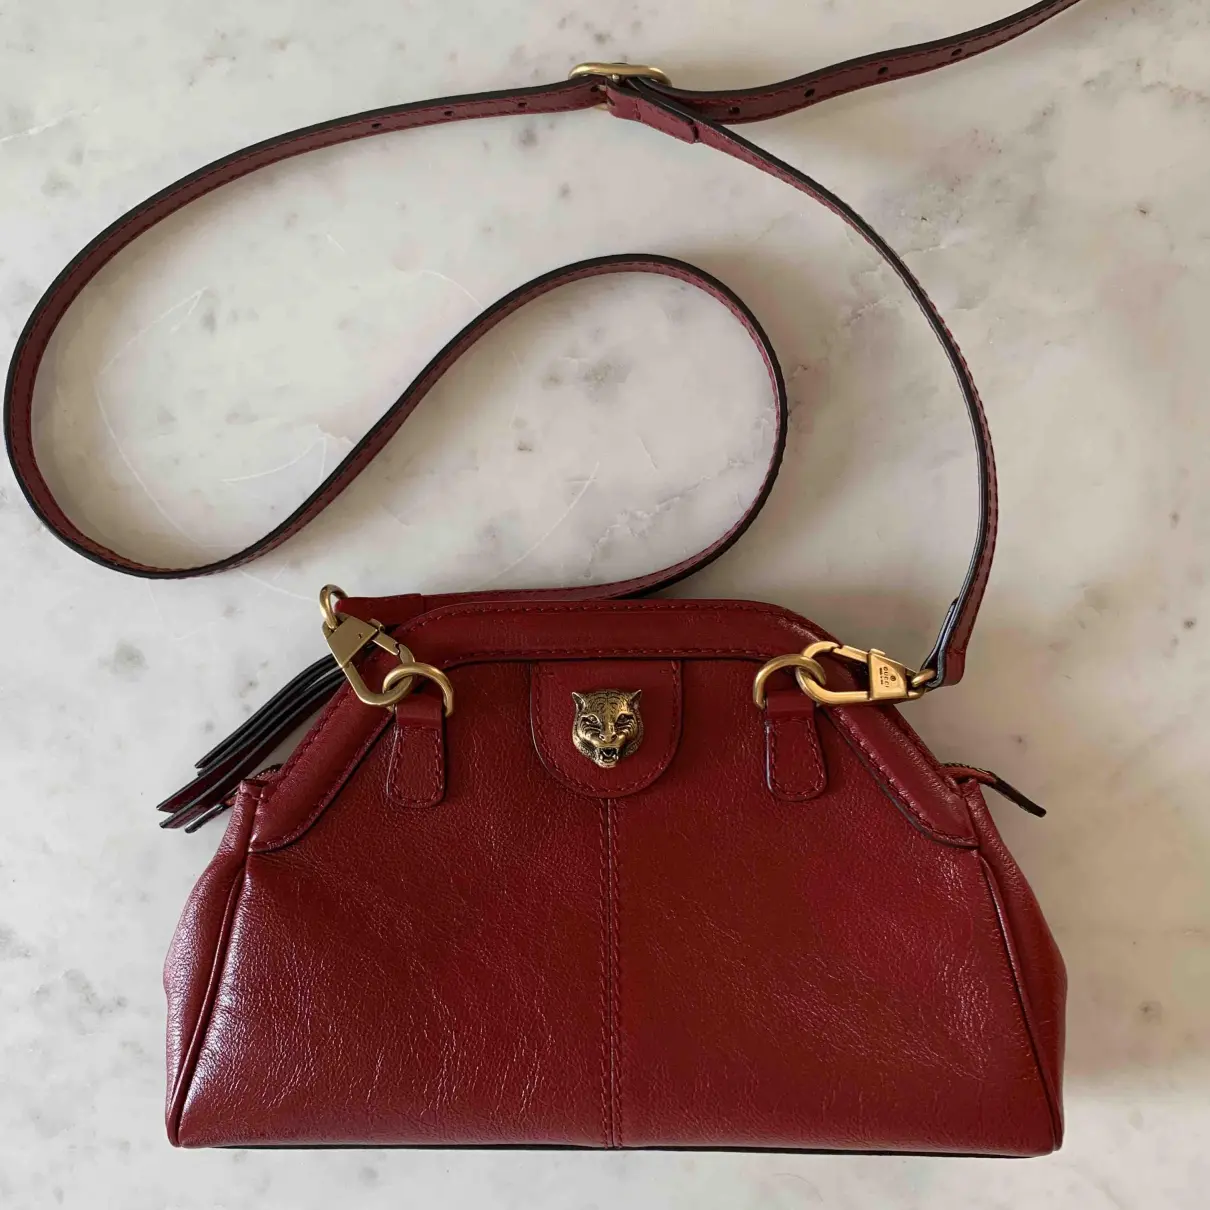 Buy Gucci Re(belle) leather crossbody bag online